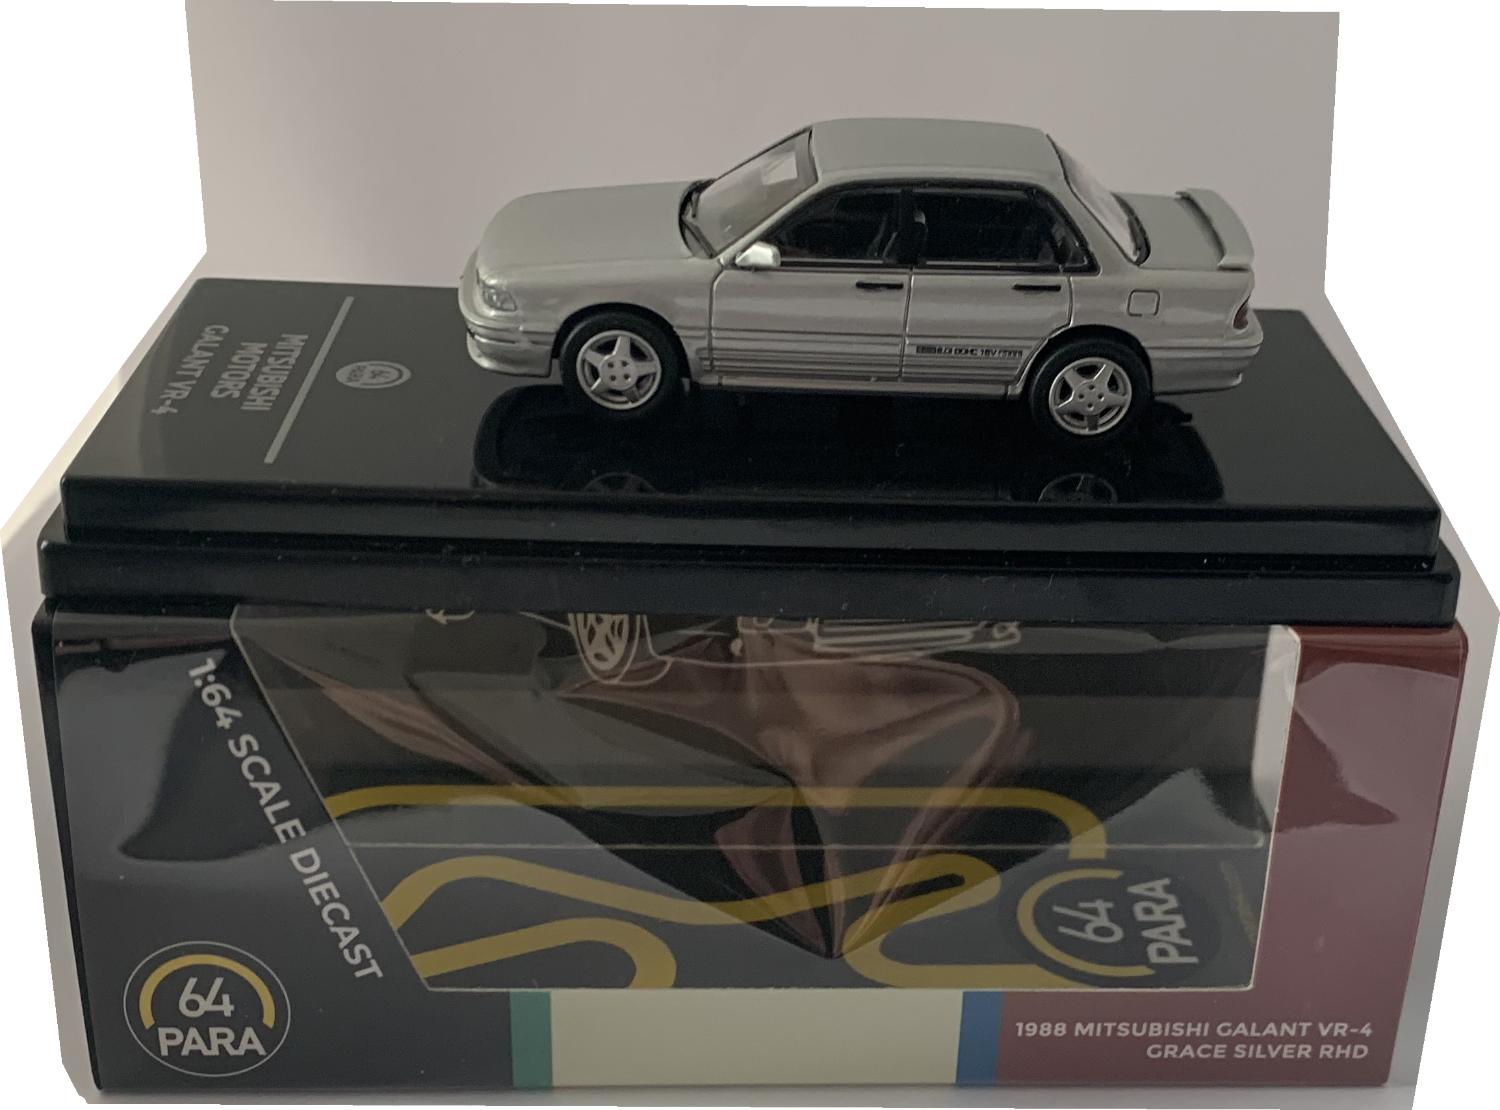 An excellent scale model of a Mitsubishi Motors Galant VR-4 decorated in grace silver with rear spoiler